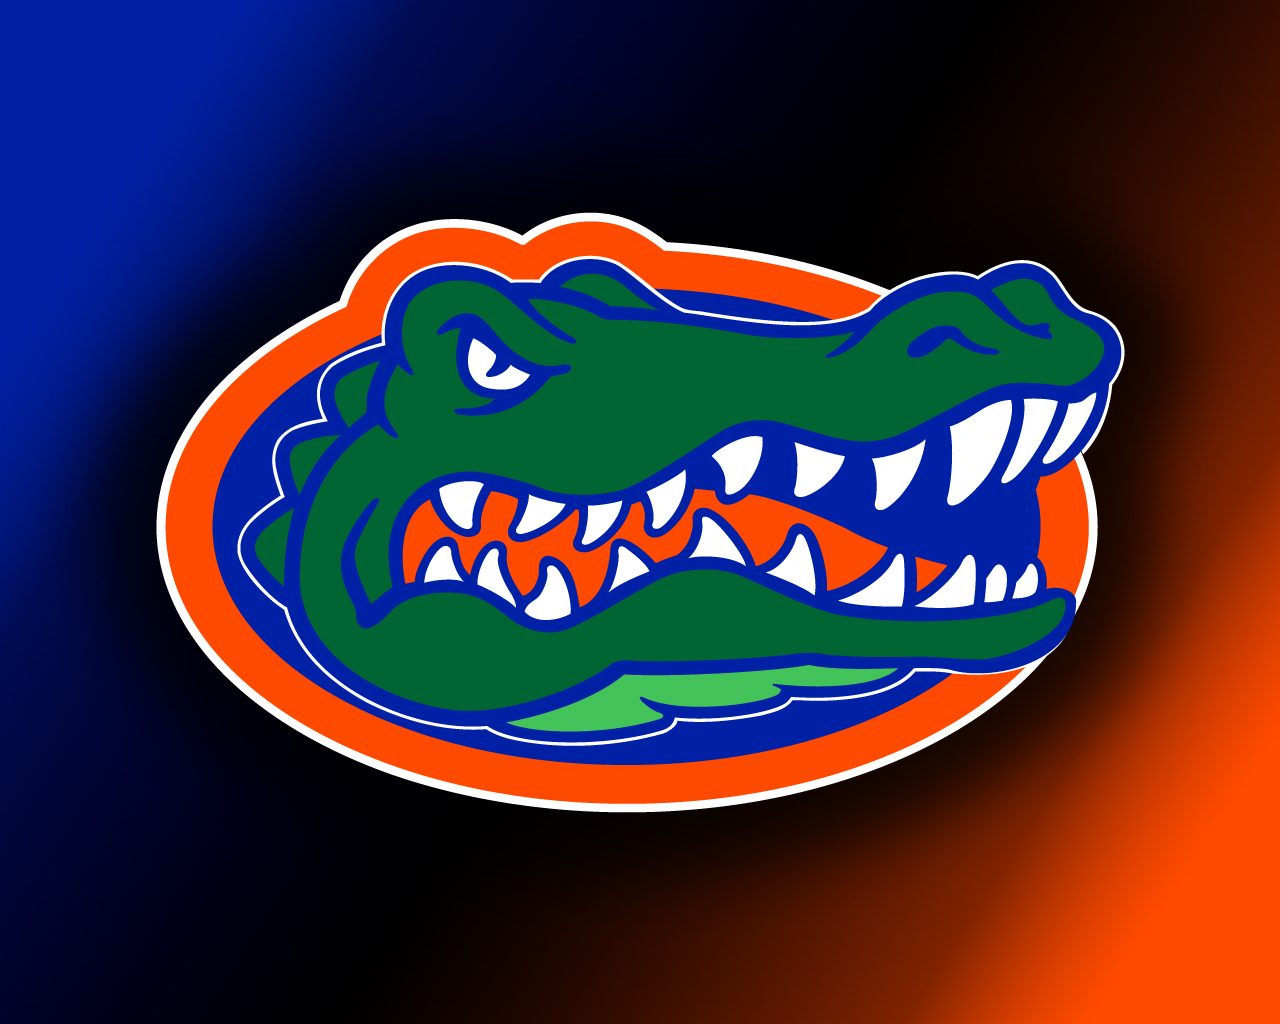 Download this Gator Fade picture